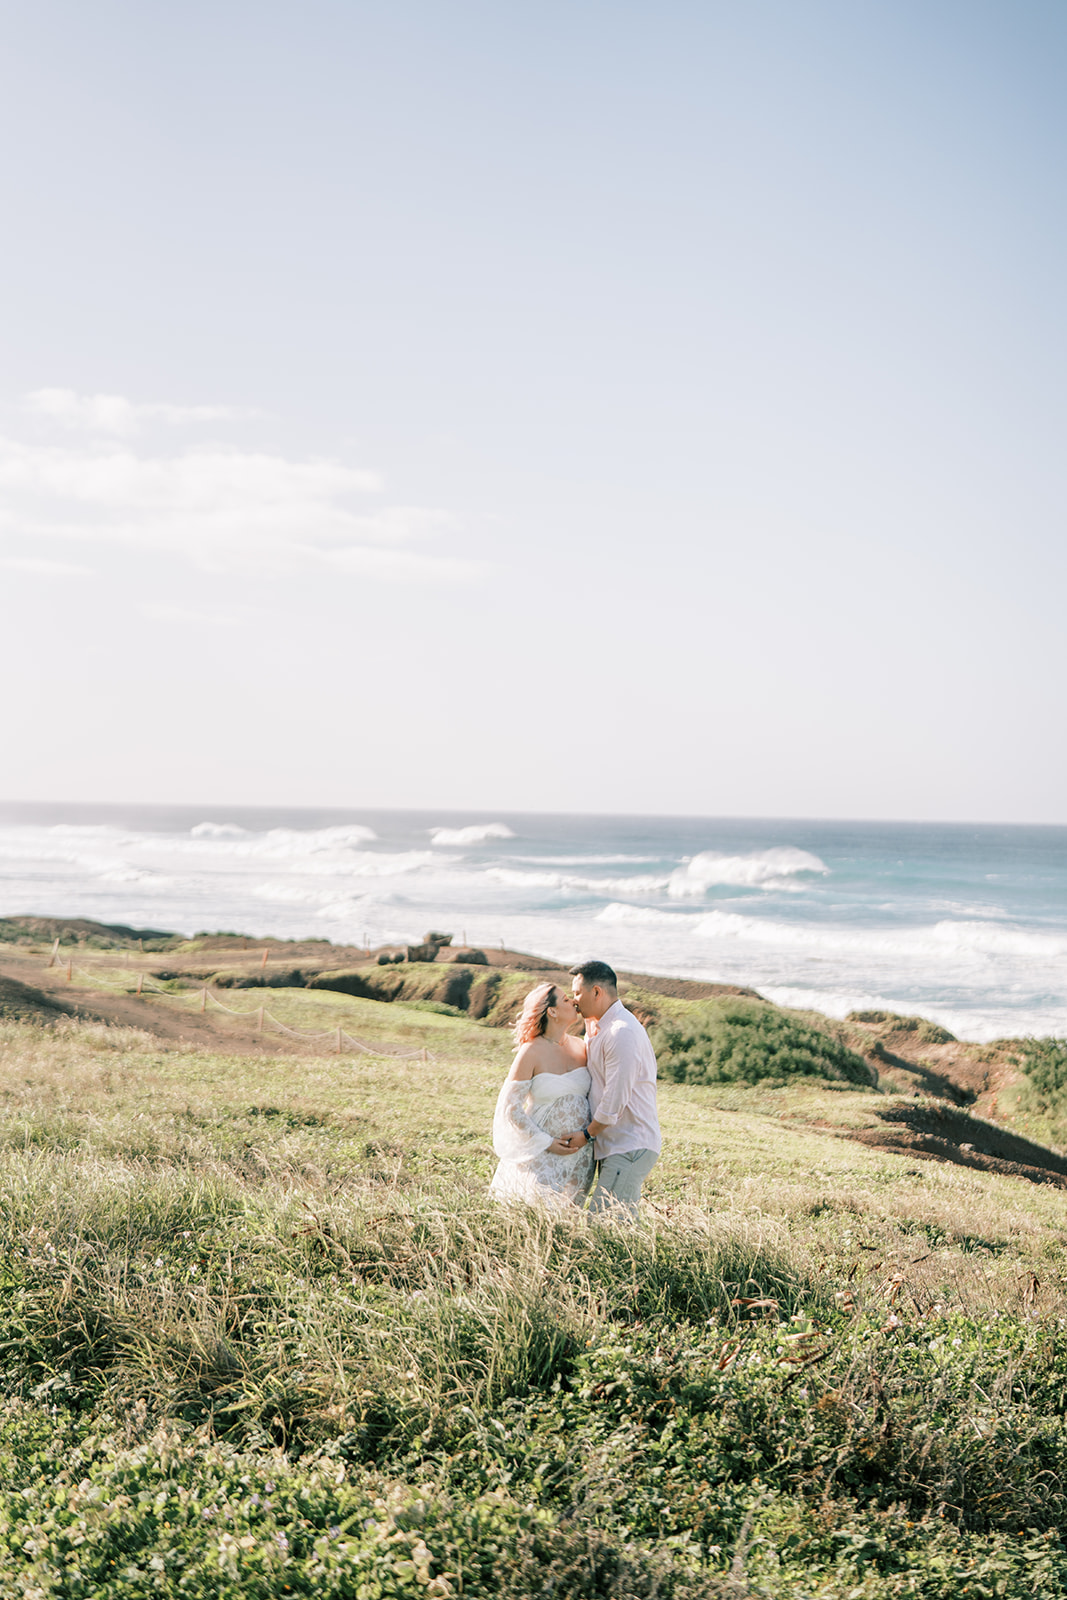 A couple embracing in a coastal grassy field with the ocean in the background during their Maternity Session